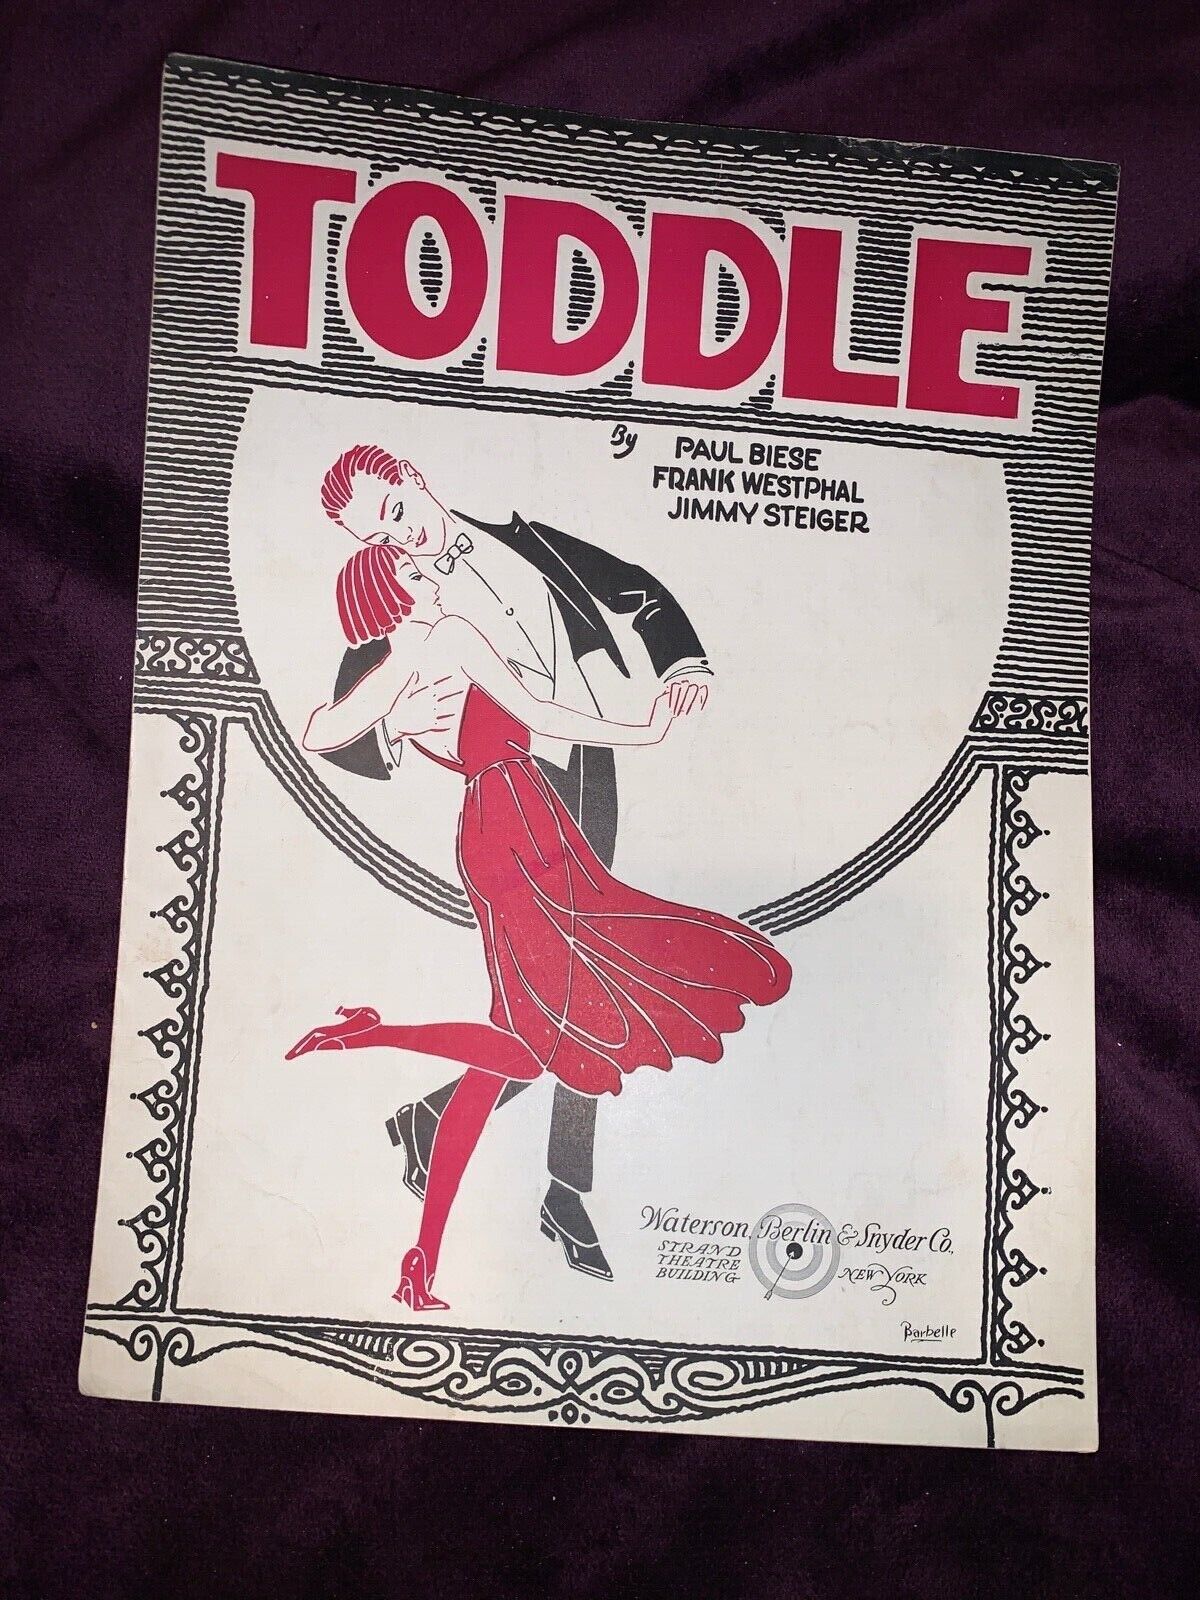 TODDLE,   1921 edition vintage sheet music.